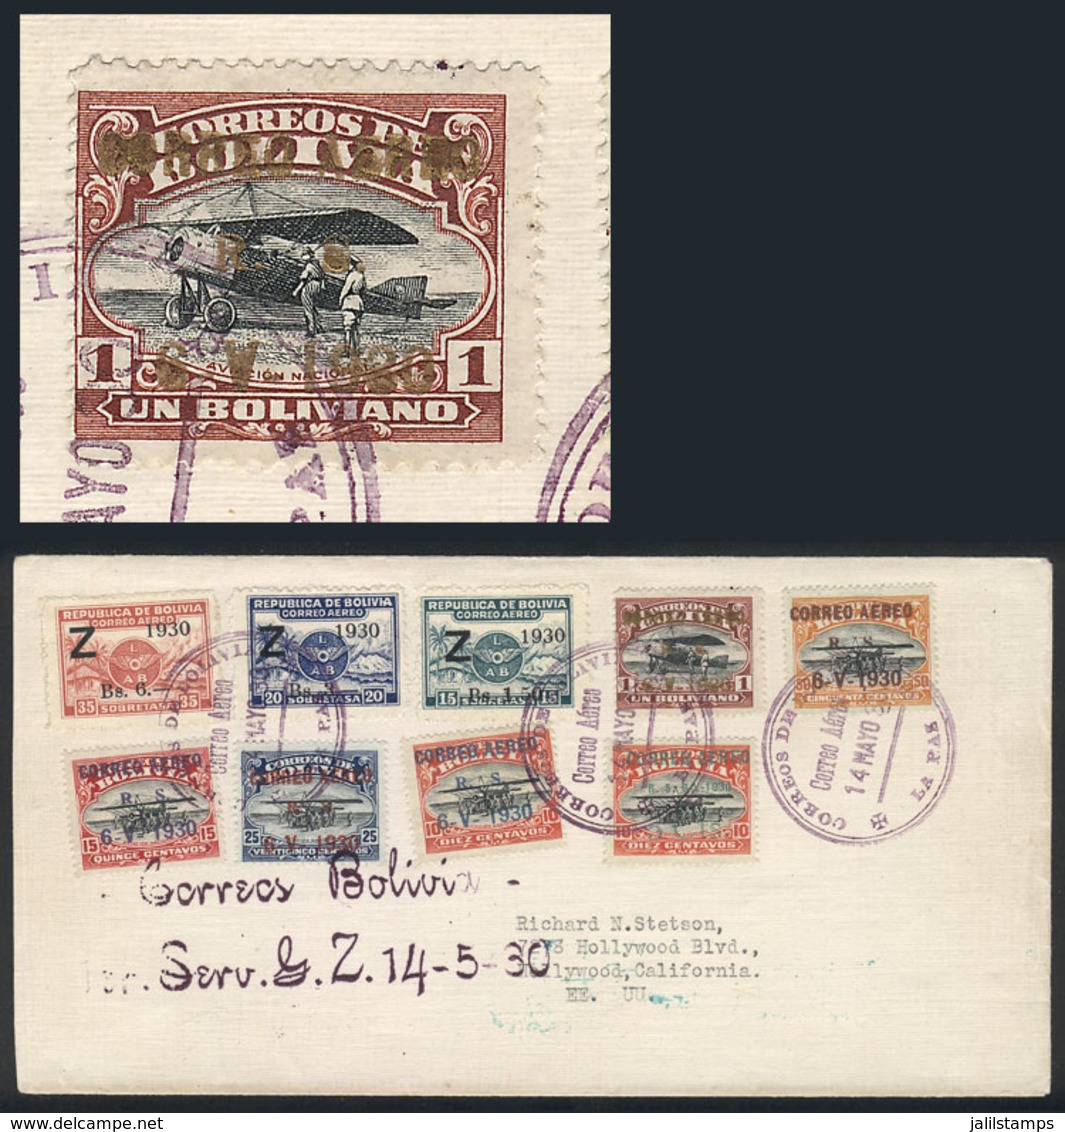 BOLIVIA: Cover With The 2 Zeppelin Sets Of 1930, The 1B. Value With Overprint In METAL INK (bronze), Cancelled With Date - Bolivien